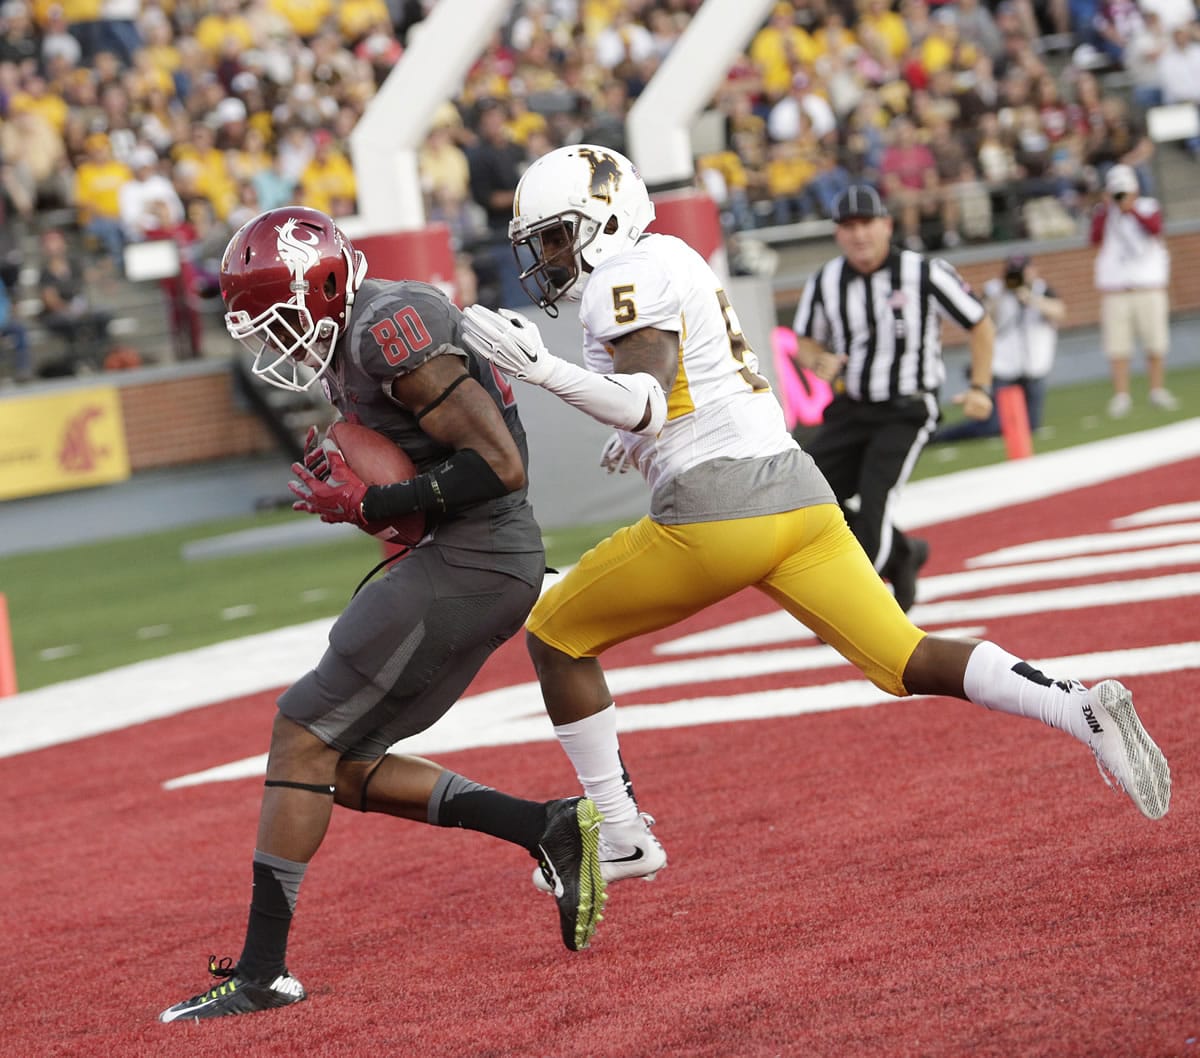 Washington State wide receiver Dom Williams (80) makes a catch for a touchdown against Wyoming cornerback Tyran Finley (5) during the first half Saturday, Sept. 19, 2015, in Pullman.